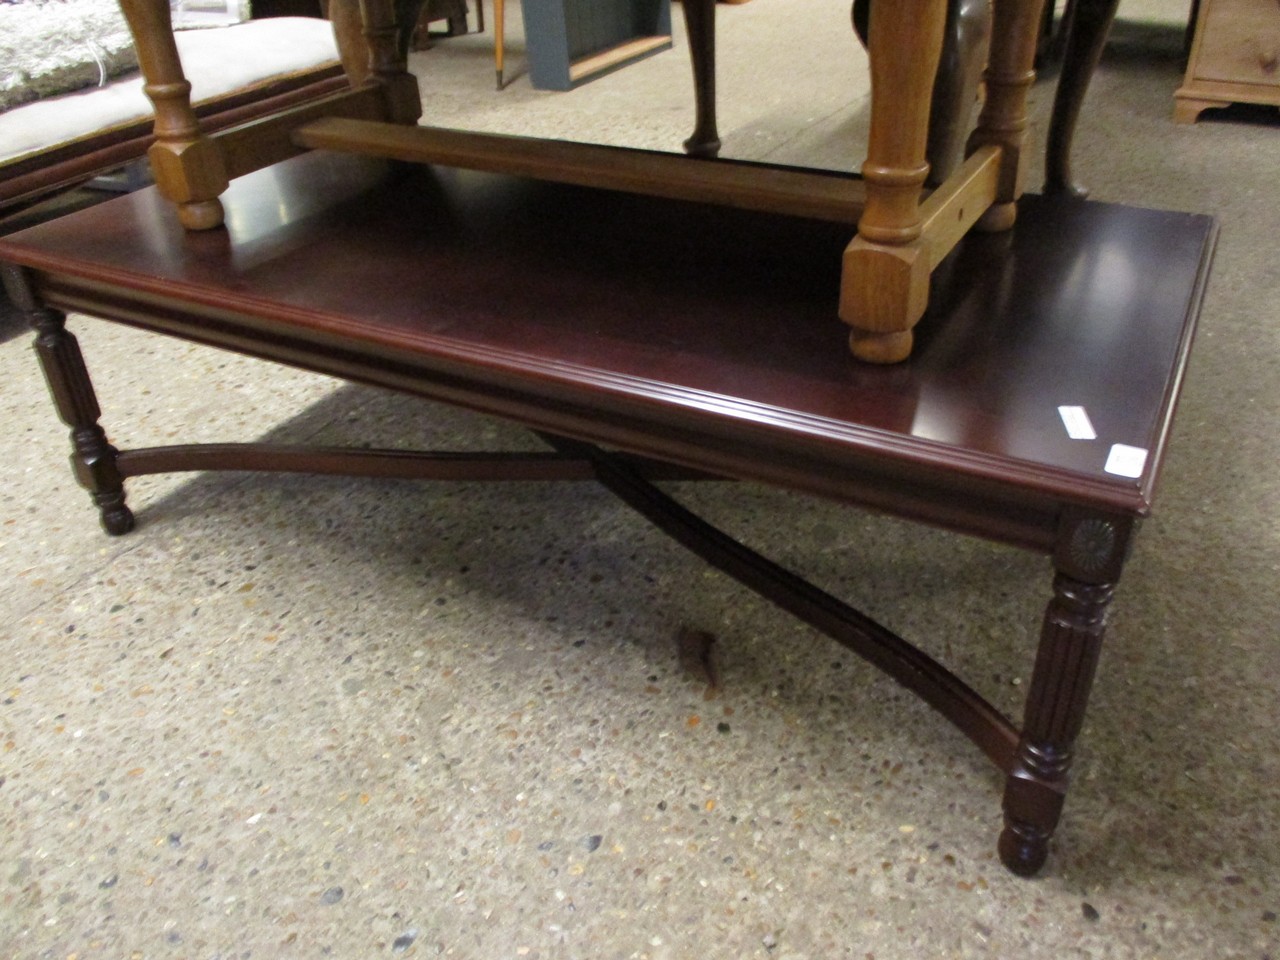 REPRODUCTION MAHOGANY RECTANGULAR COFFEE TABLE WITH AN X-FORMED STRETCHER AND REEDED LEGS